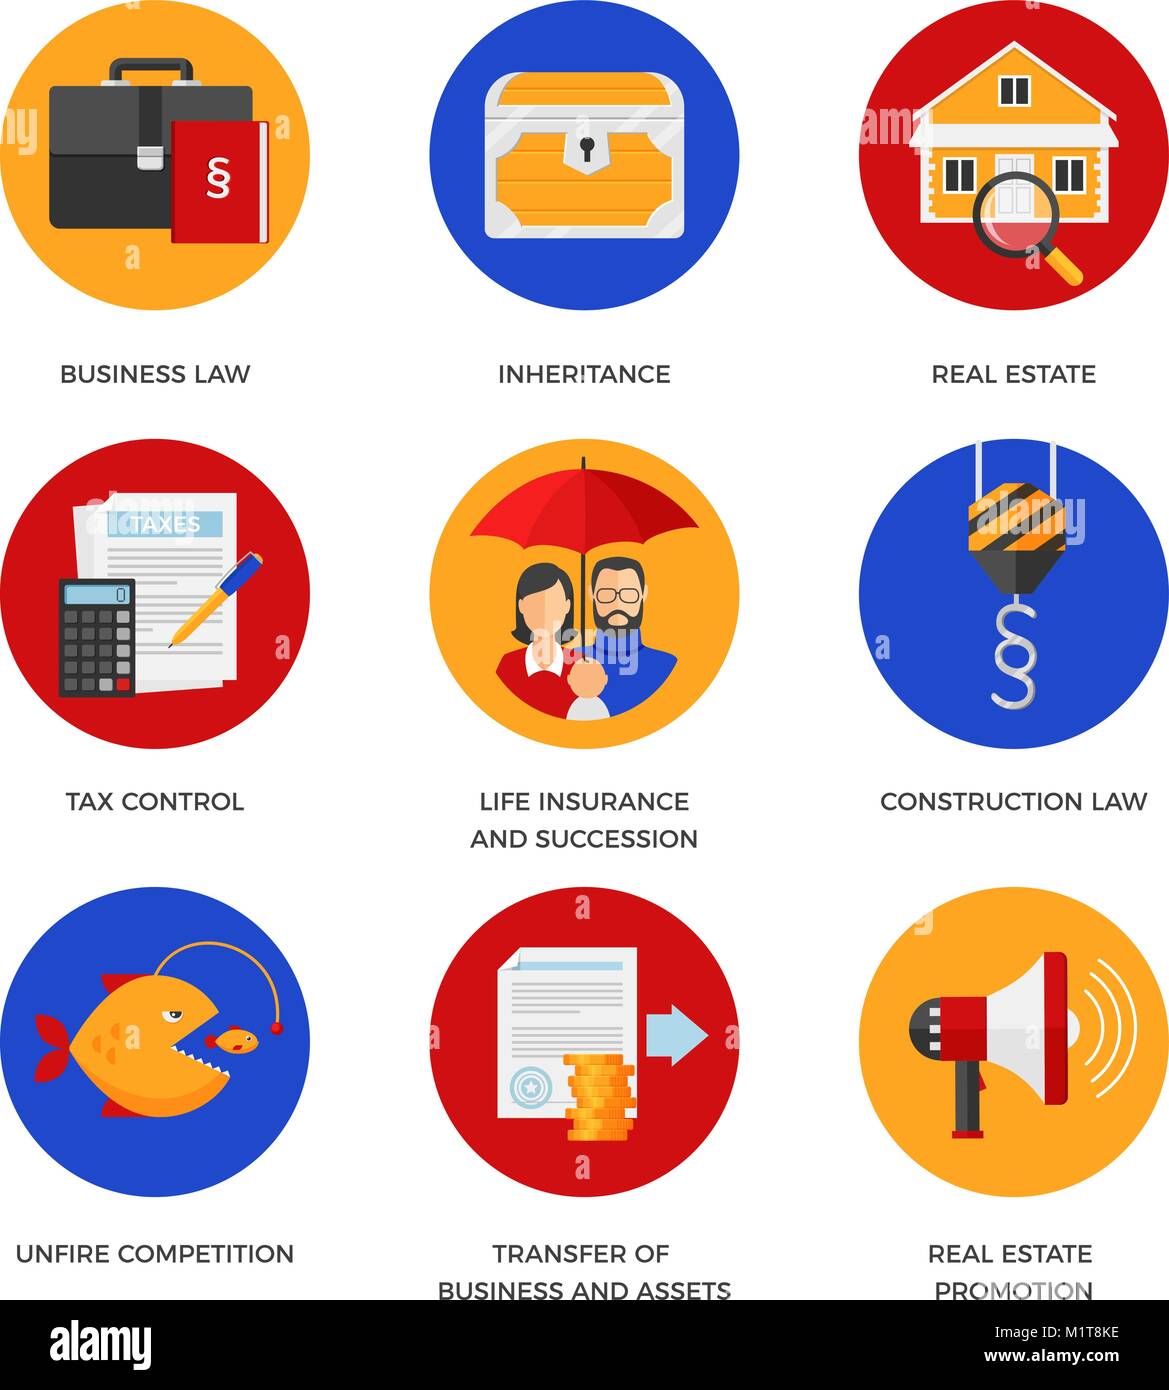 Vector icons of legal services like business and construction law, real estate, inheritance and tax control. Flat design Stock Vector